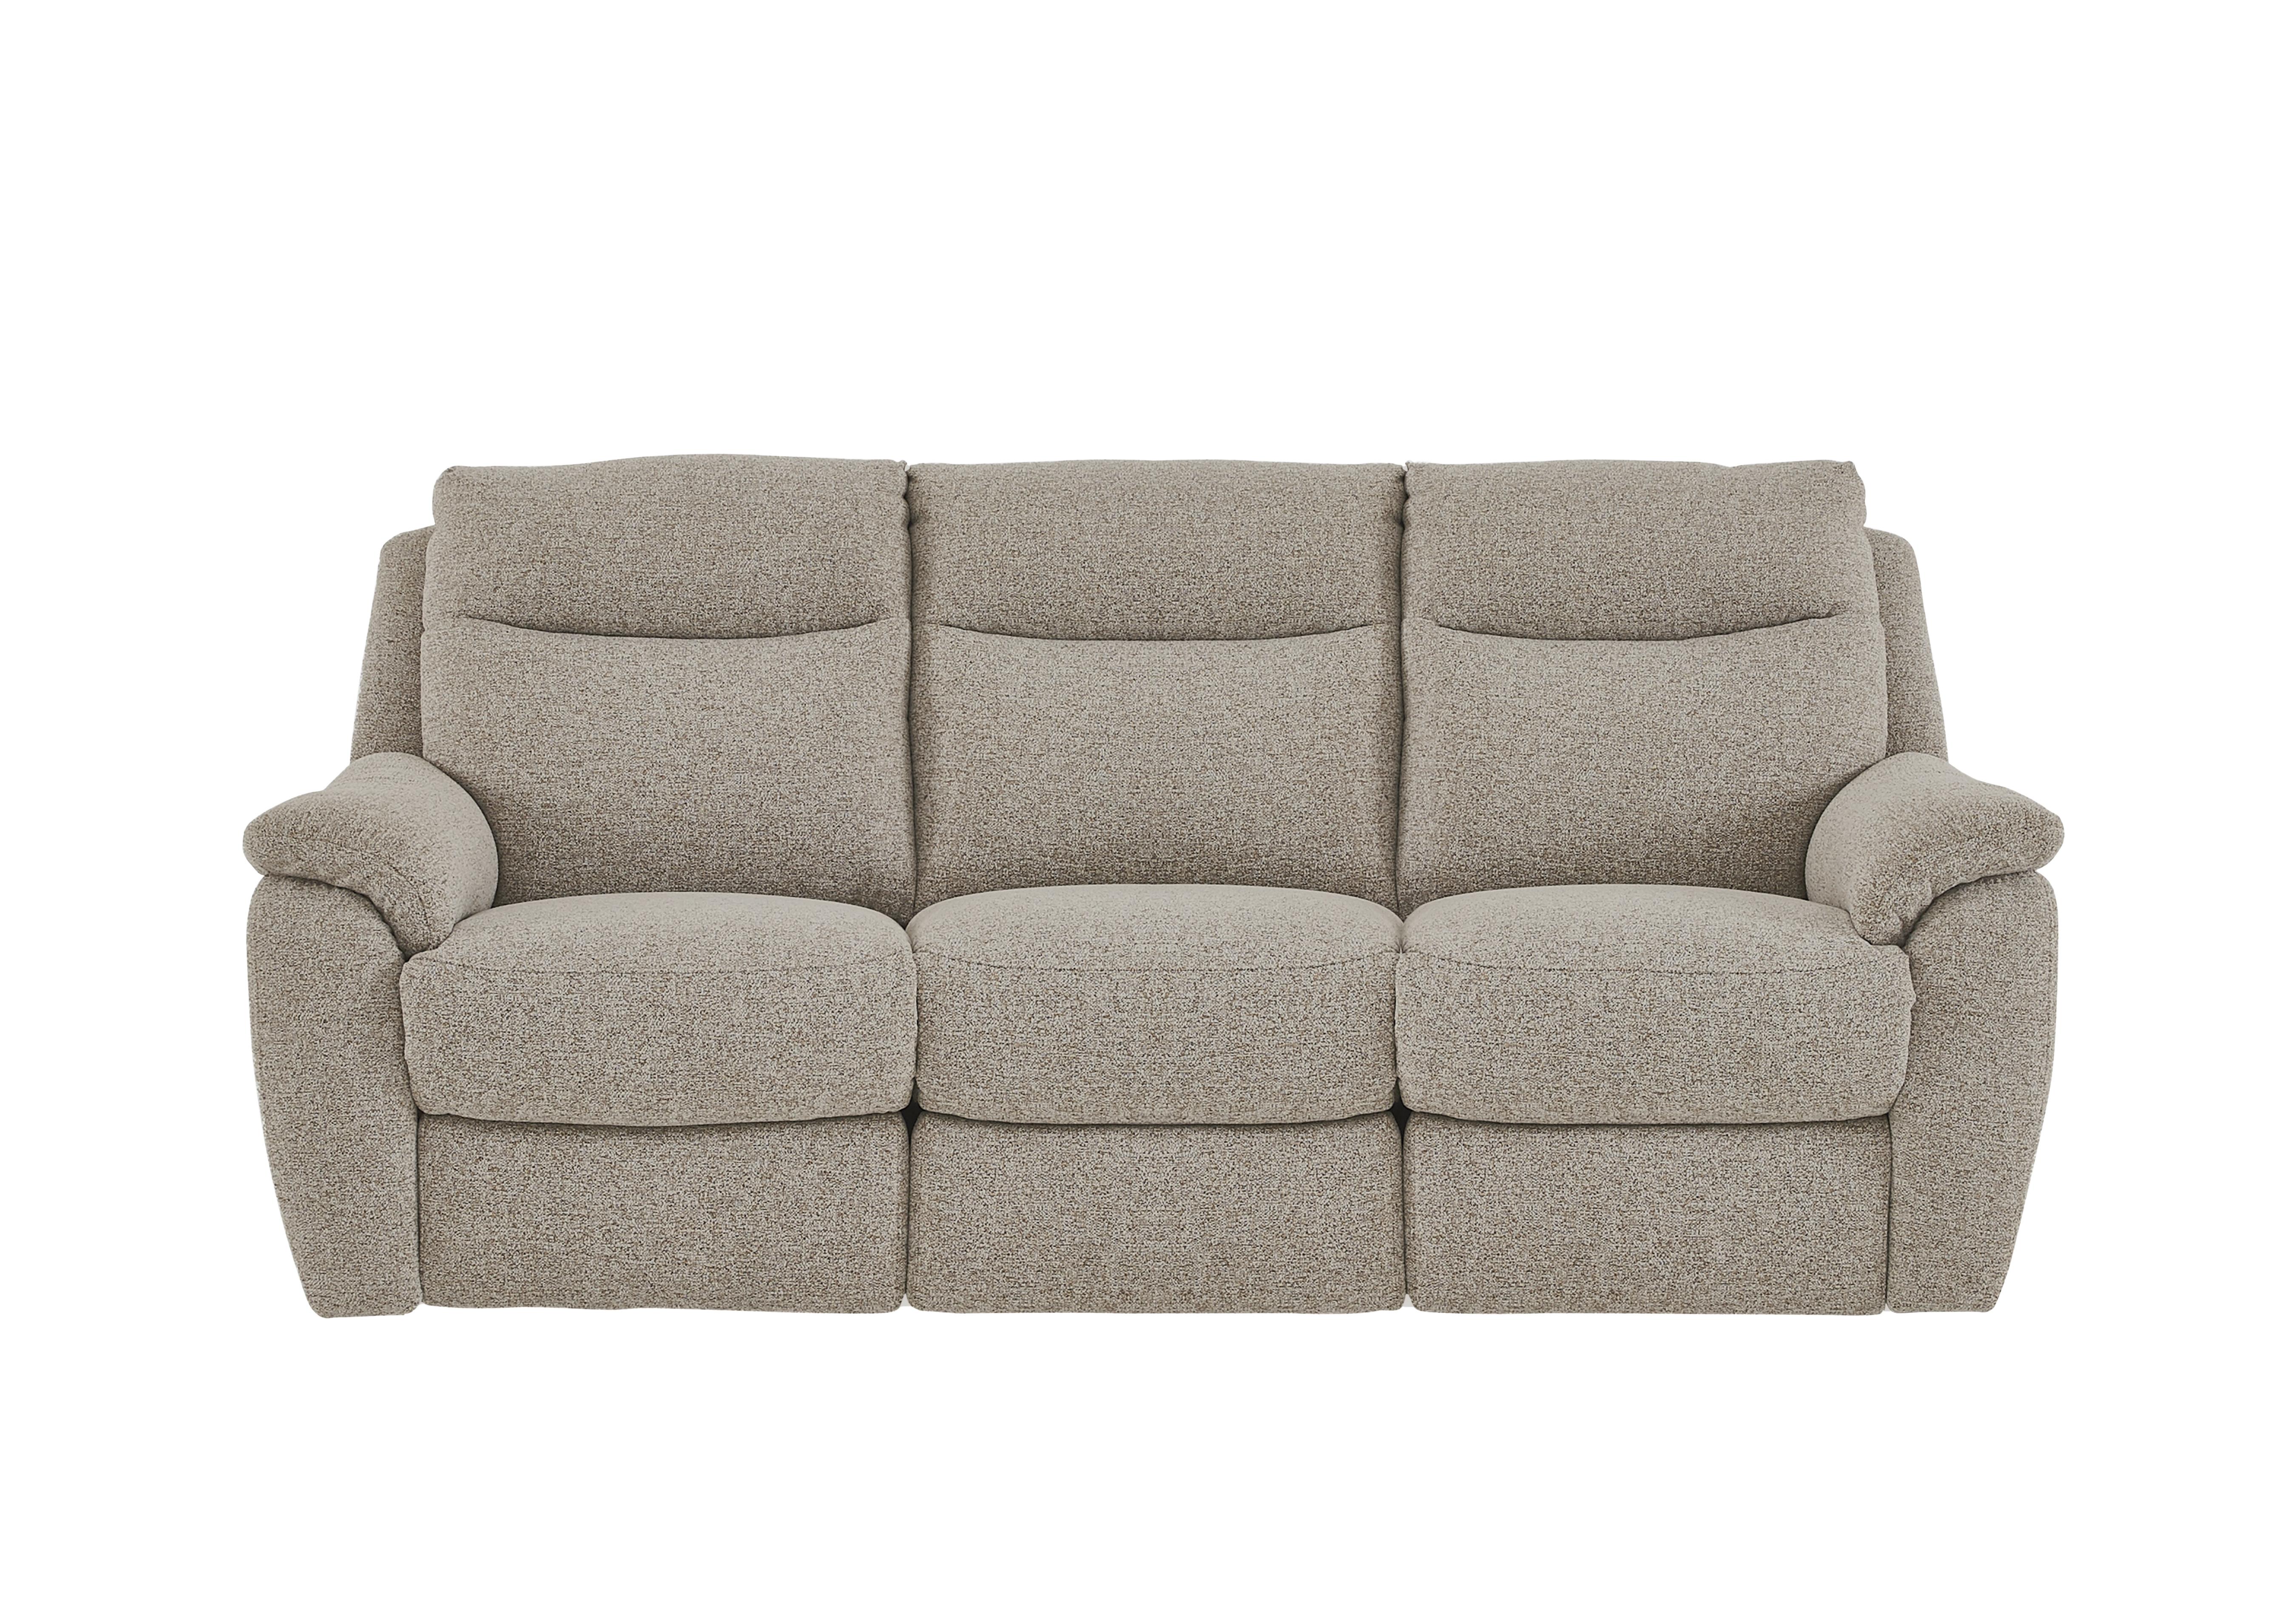 Snug 3 Seater Fabric Sofa in Fab-Chl-R25 Biscuit on Furniture Village